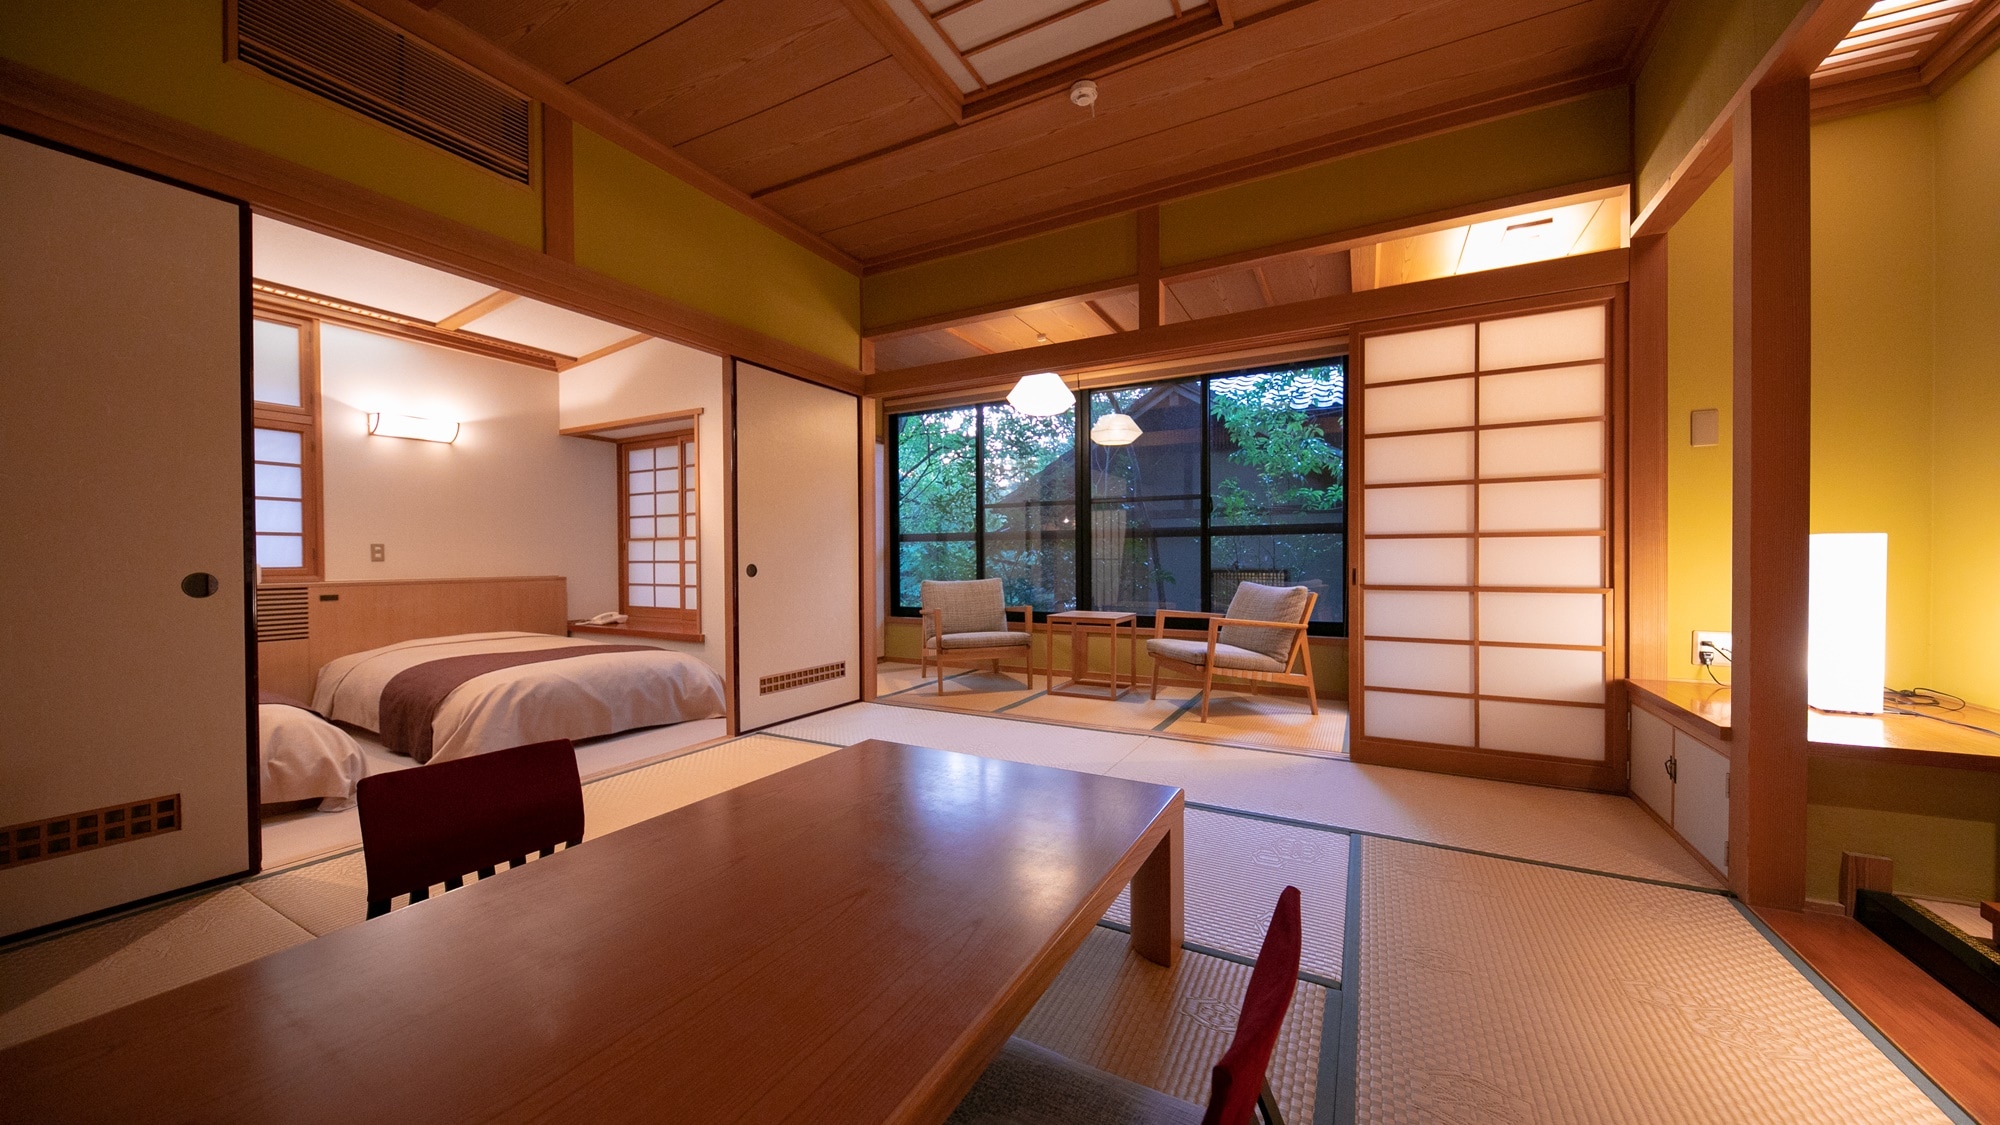 Annex (with semi open-air bath) Japanese-style room 10 tatami mats + Western-style room 8 tatami mats